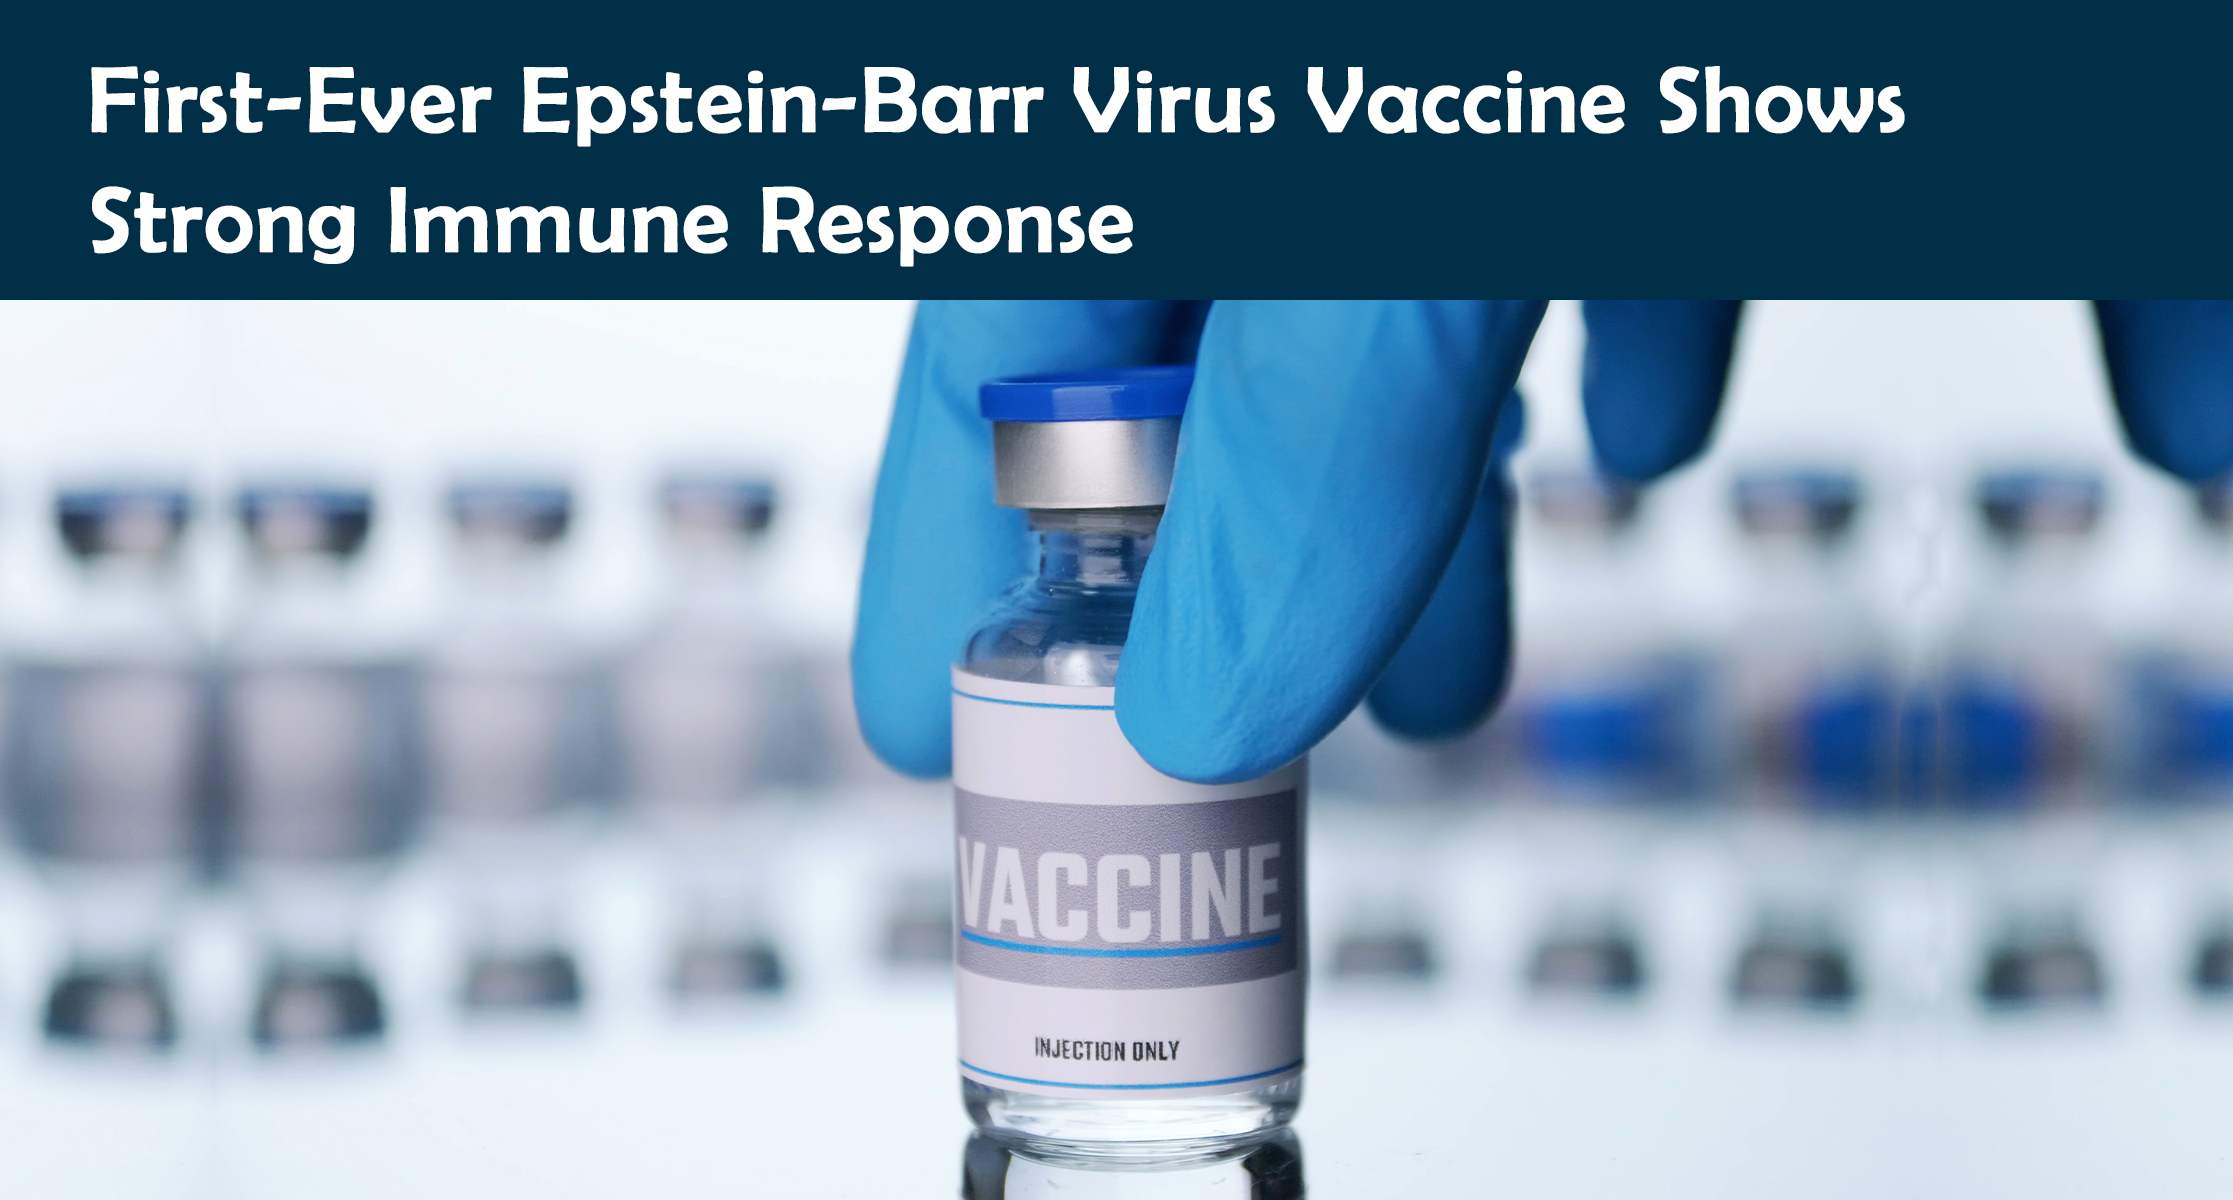 First-Ever Epstein-Barr Virus Vaccine Shows Strong Immune Response